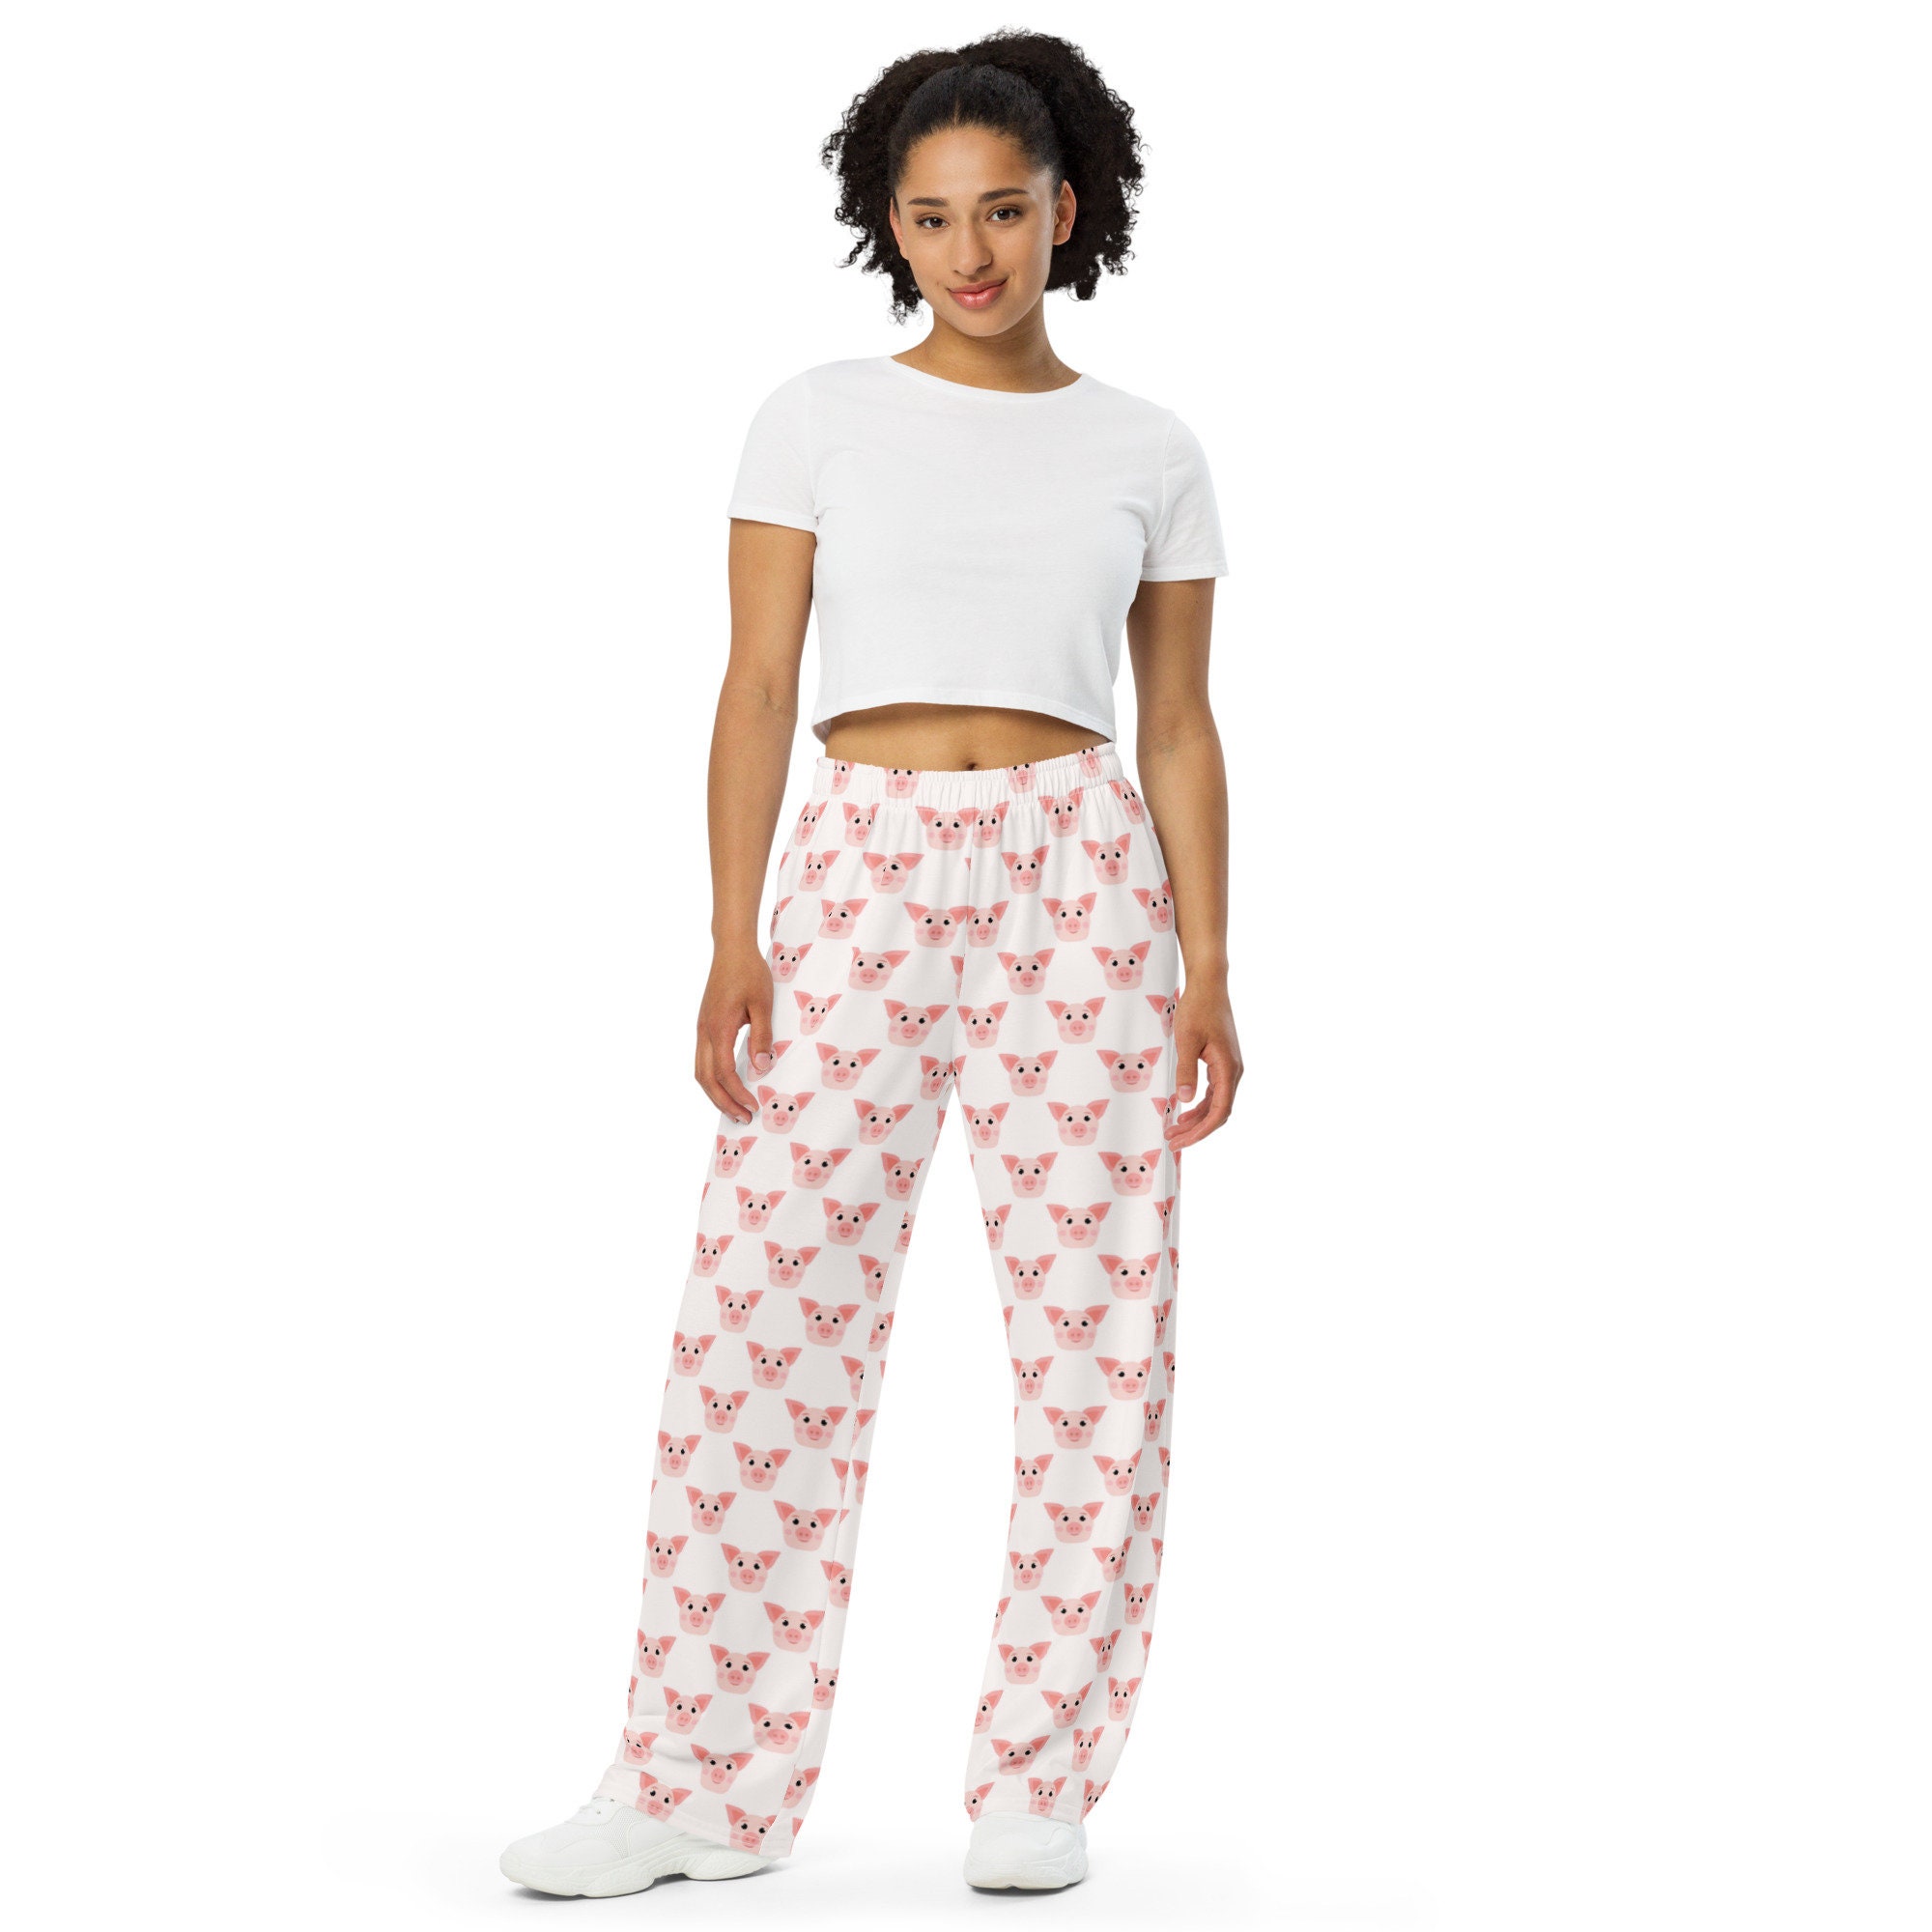 Women's Extra Tall Flannel Pajama Pants Extra Long Pj Pants Pink